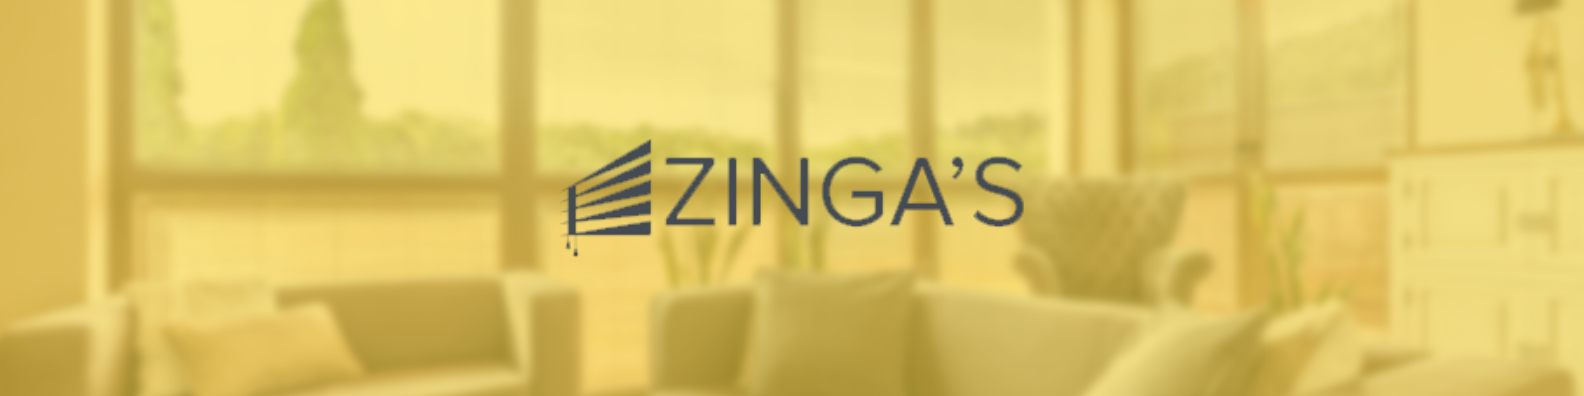 Announcing Our Preferred Partner–Zinga’s Blinds